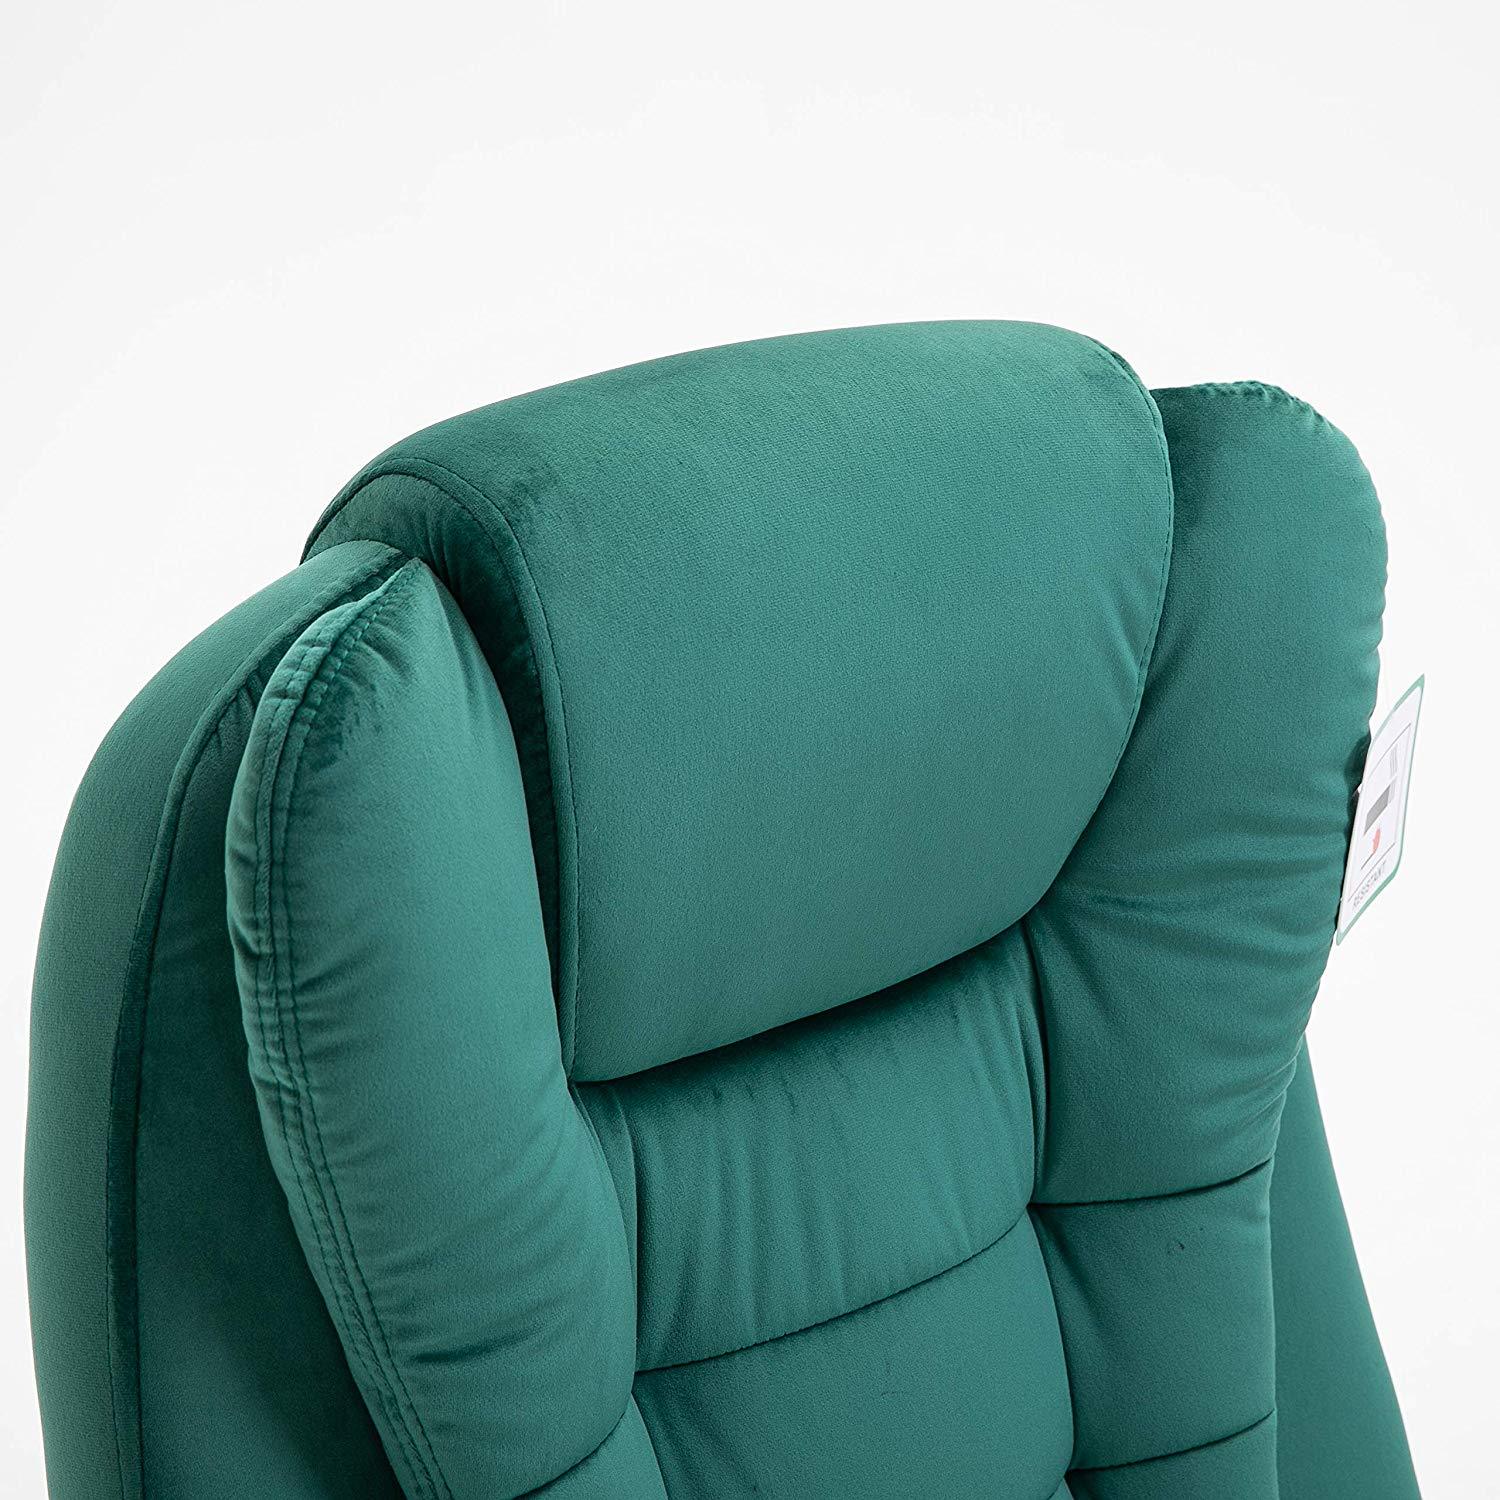 Cherry Tree Furniture Executive Recline Extra Padded Office Chair Standard, MO17 Green Velvet